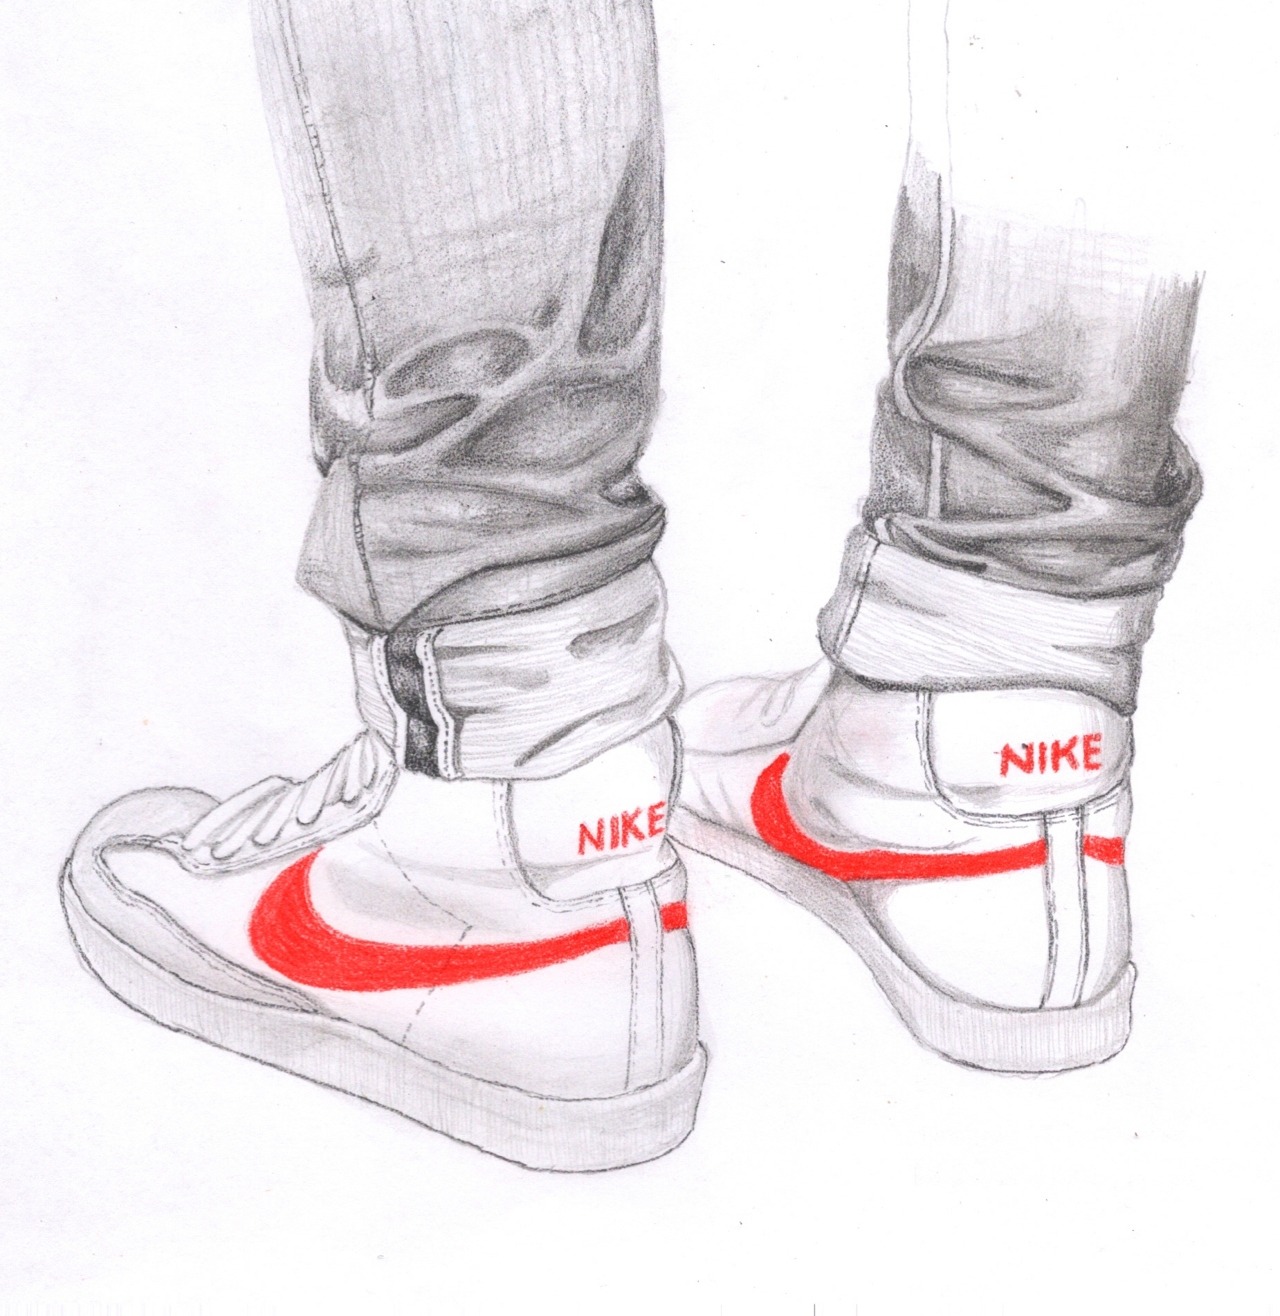 Nike Shoes of Edward H. sketched by http://compllexx.tumblr.com